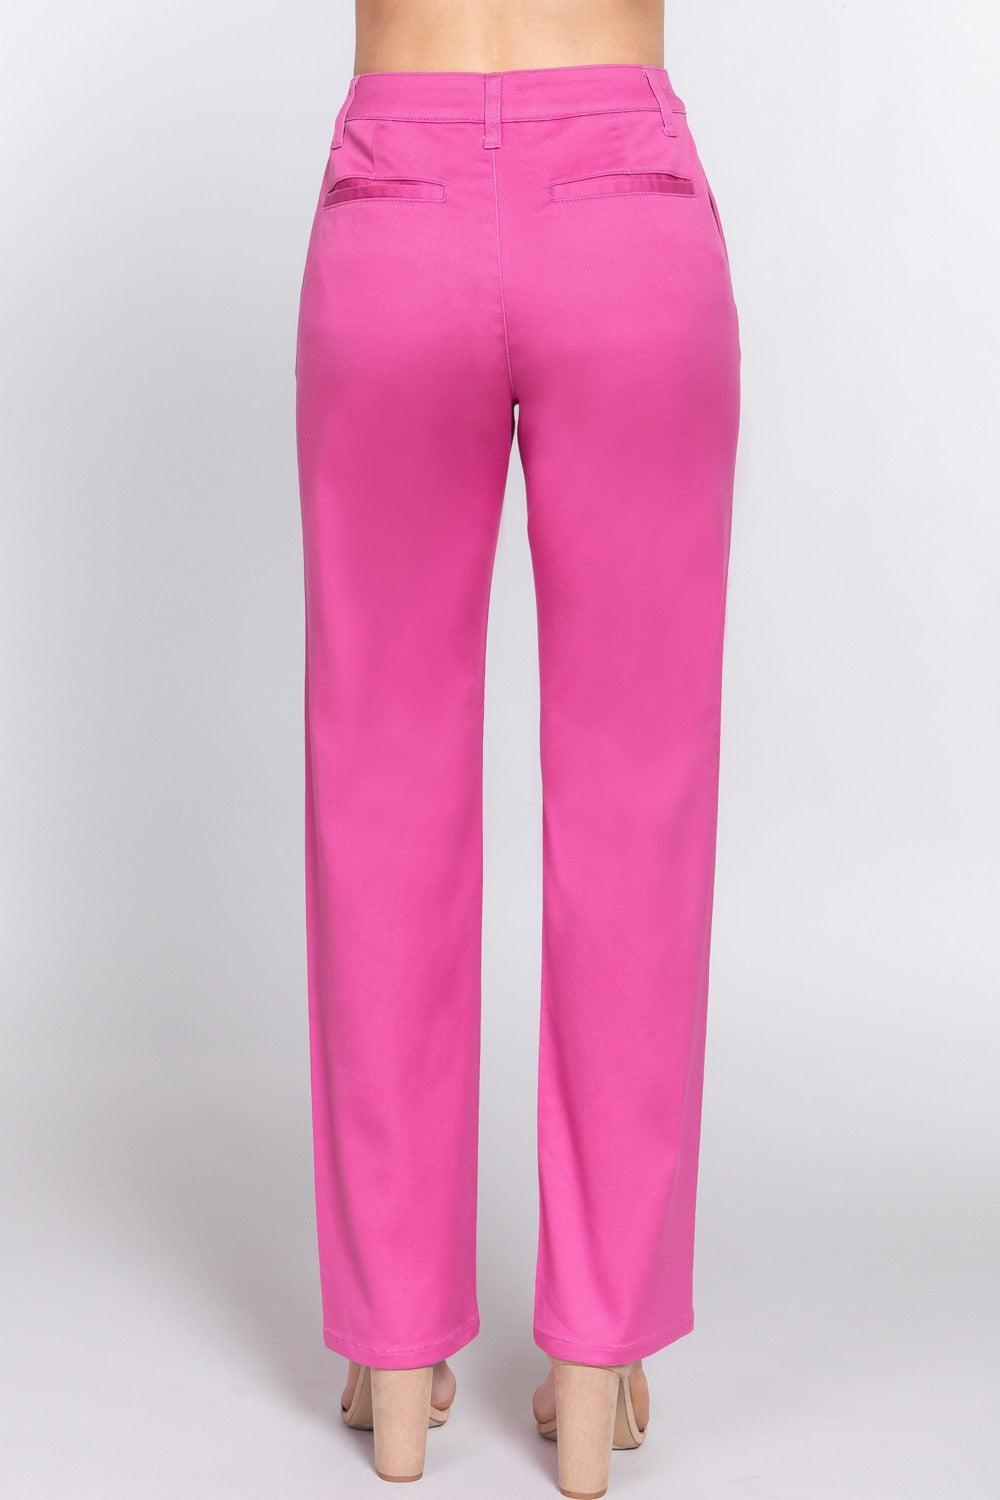 a woman wearing pink pants and heels